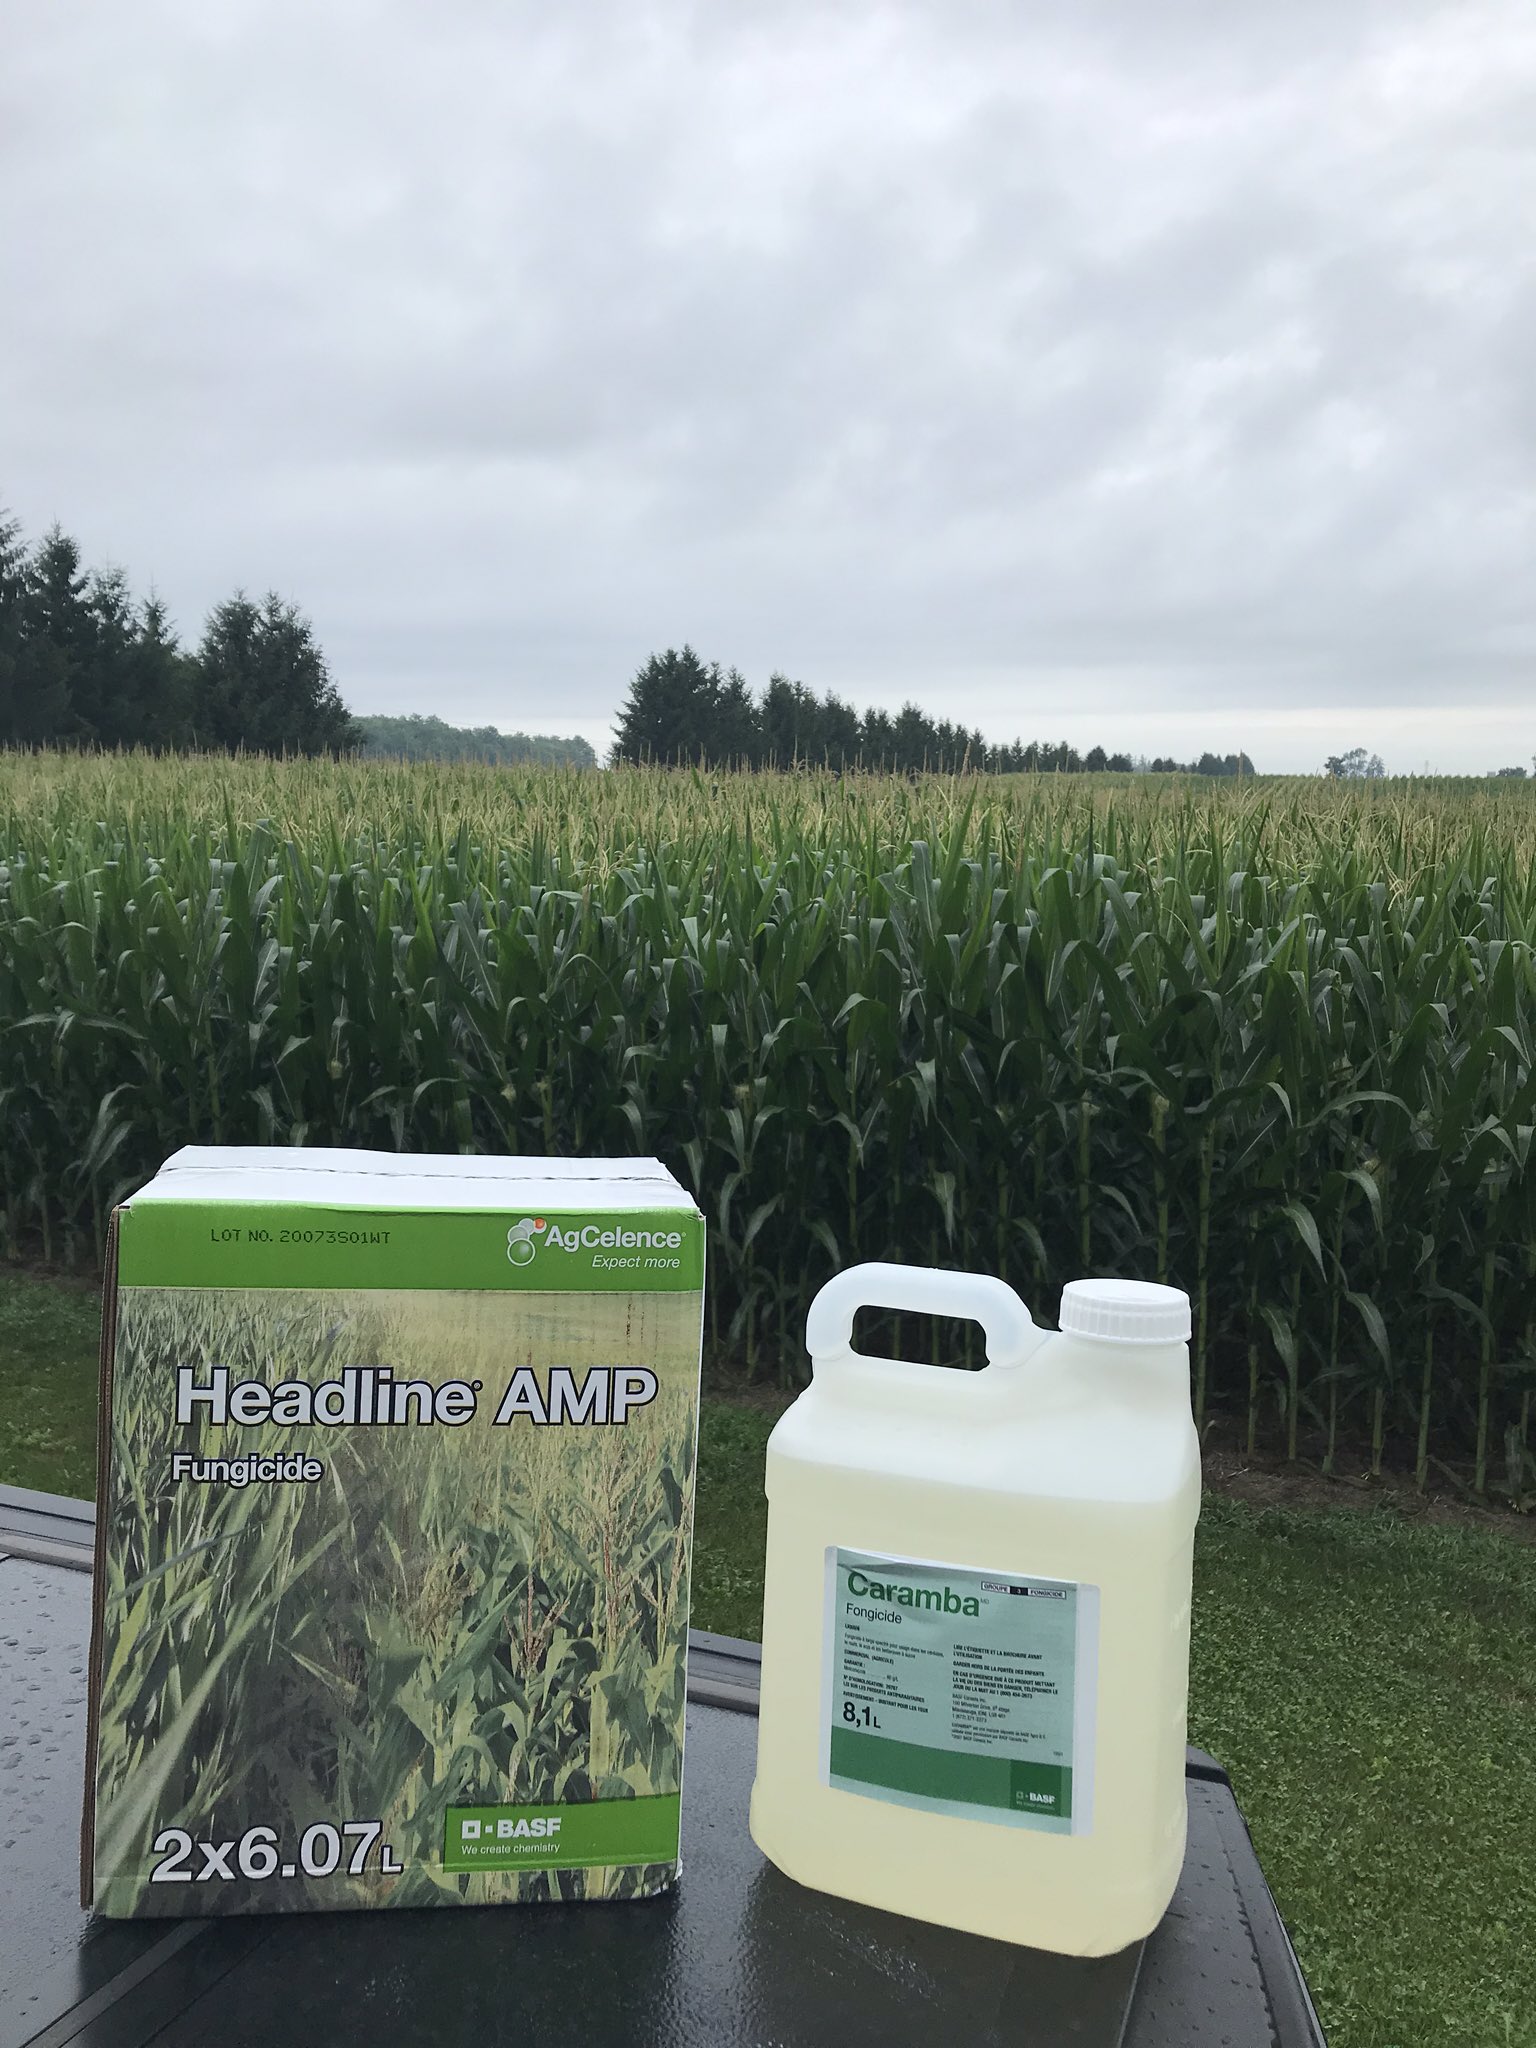 Ken Currah, CCA-On on X: Tassels out, pollen shedding, and silks  availableoptimum application timing window is open for Headline Amp plus  Caramba, the proven corn fungicide solution for foliar disease and ear